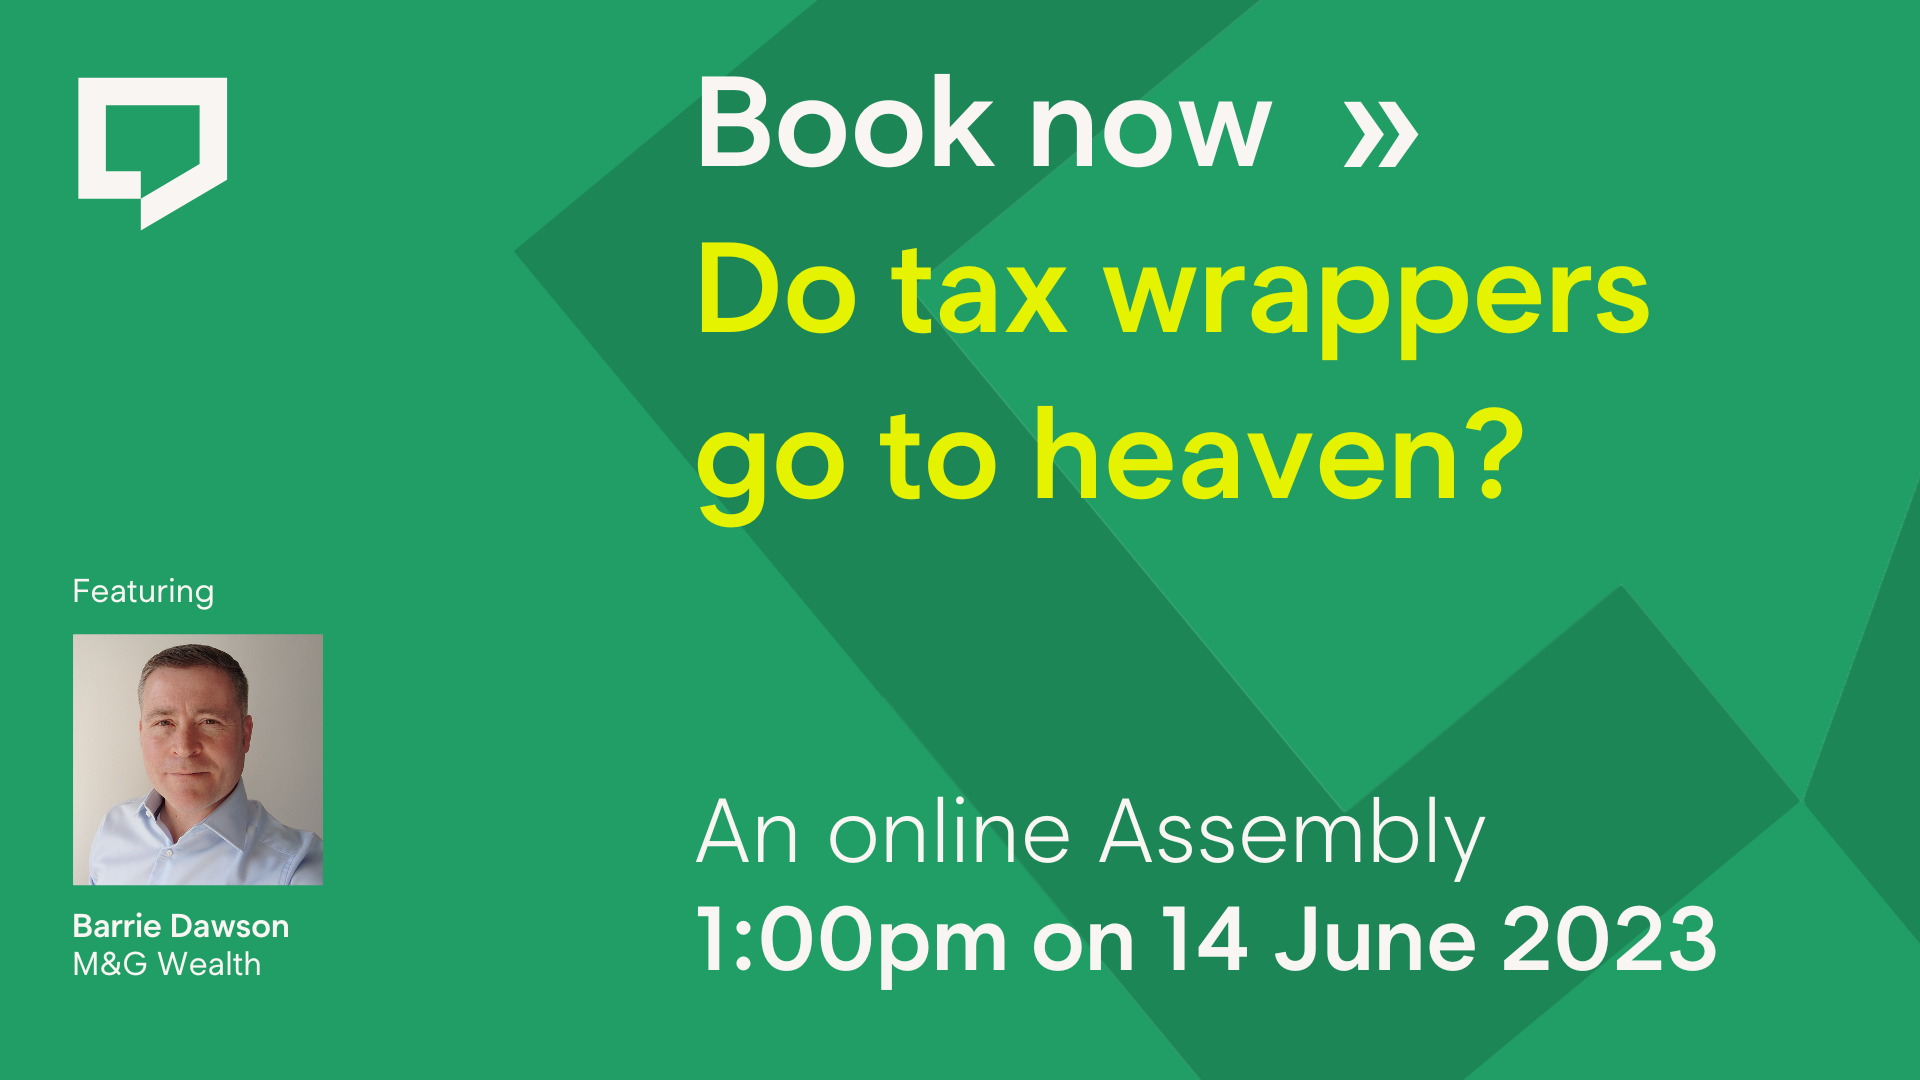 Book now: Do tax wrappers go to heaven? An online Assembly at 1pm on 14 June 2023 featuring Barrie Dawson of M&G Wealth.